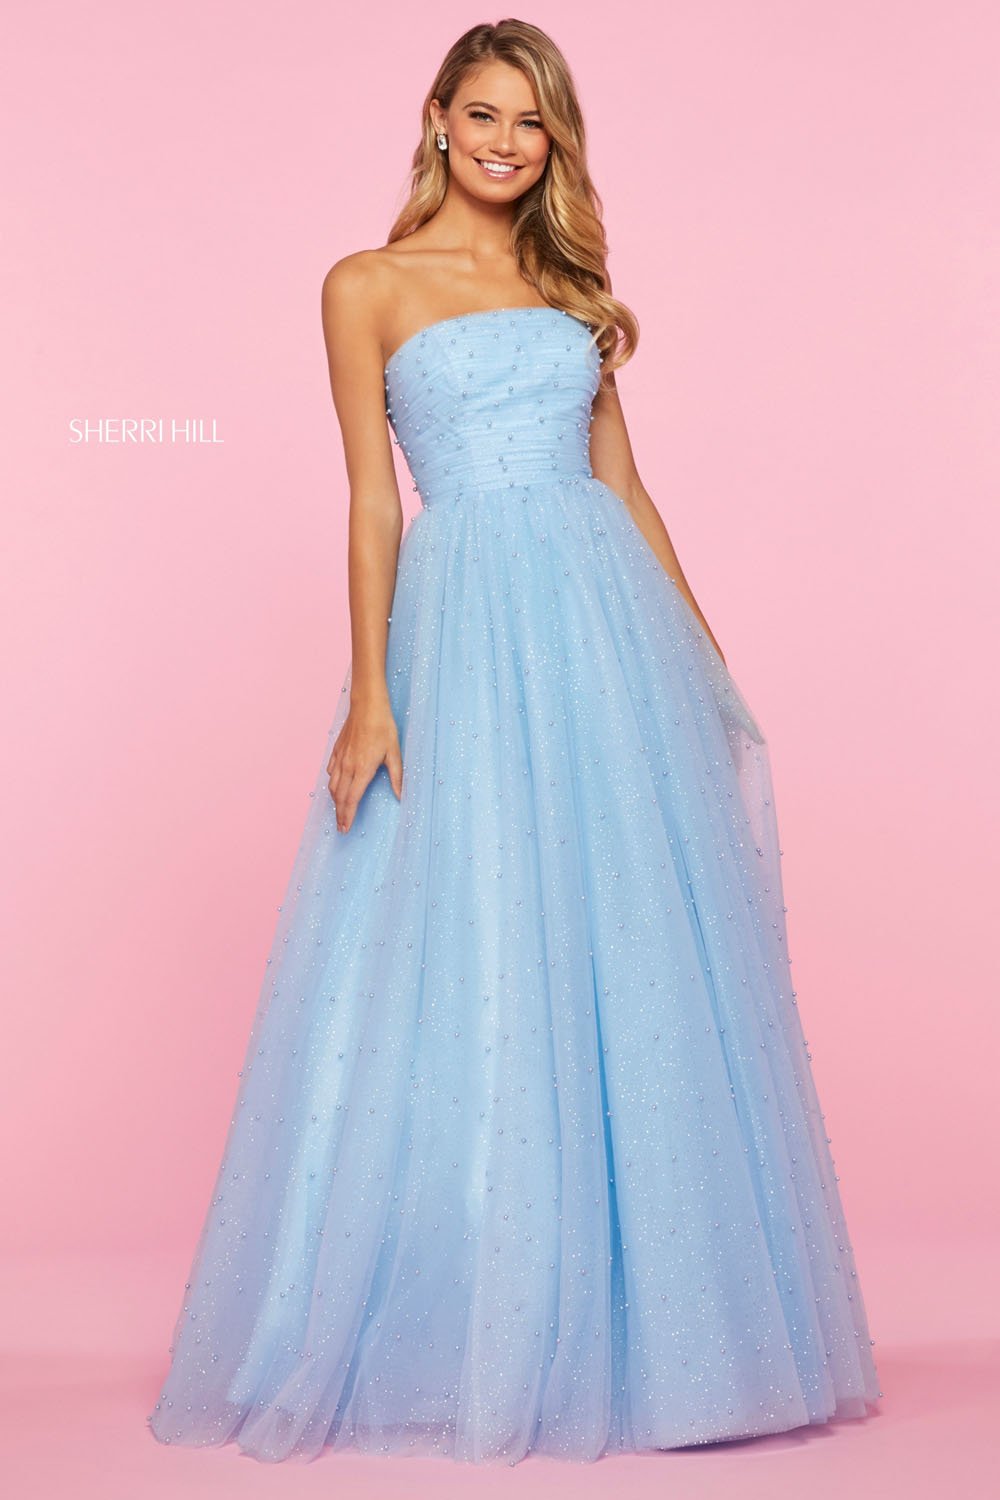 Sherri Hill 53381 dress images in these colors: Champagne, Blush, Yellow, Ivory, Light Blue.